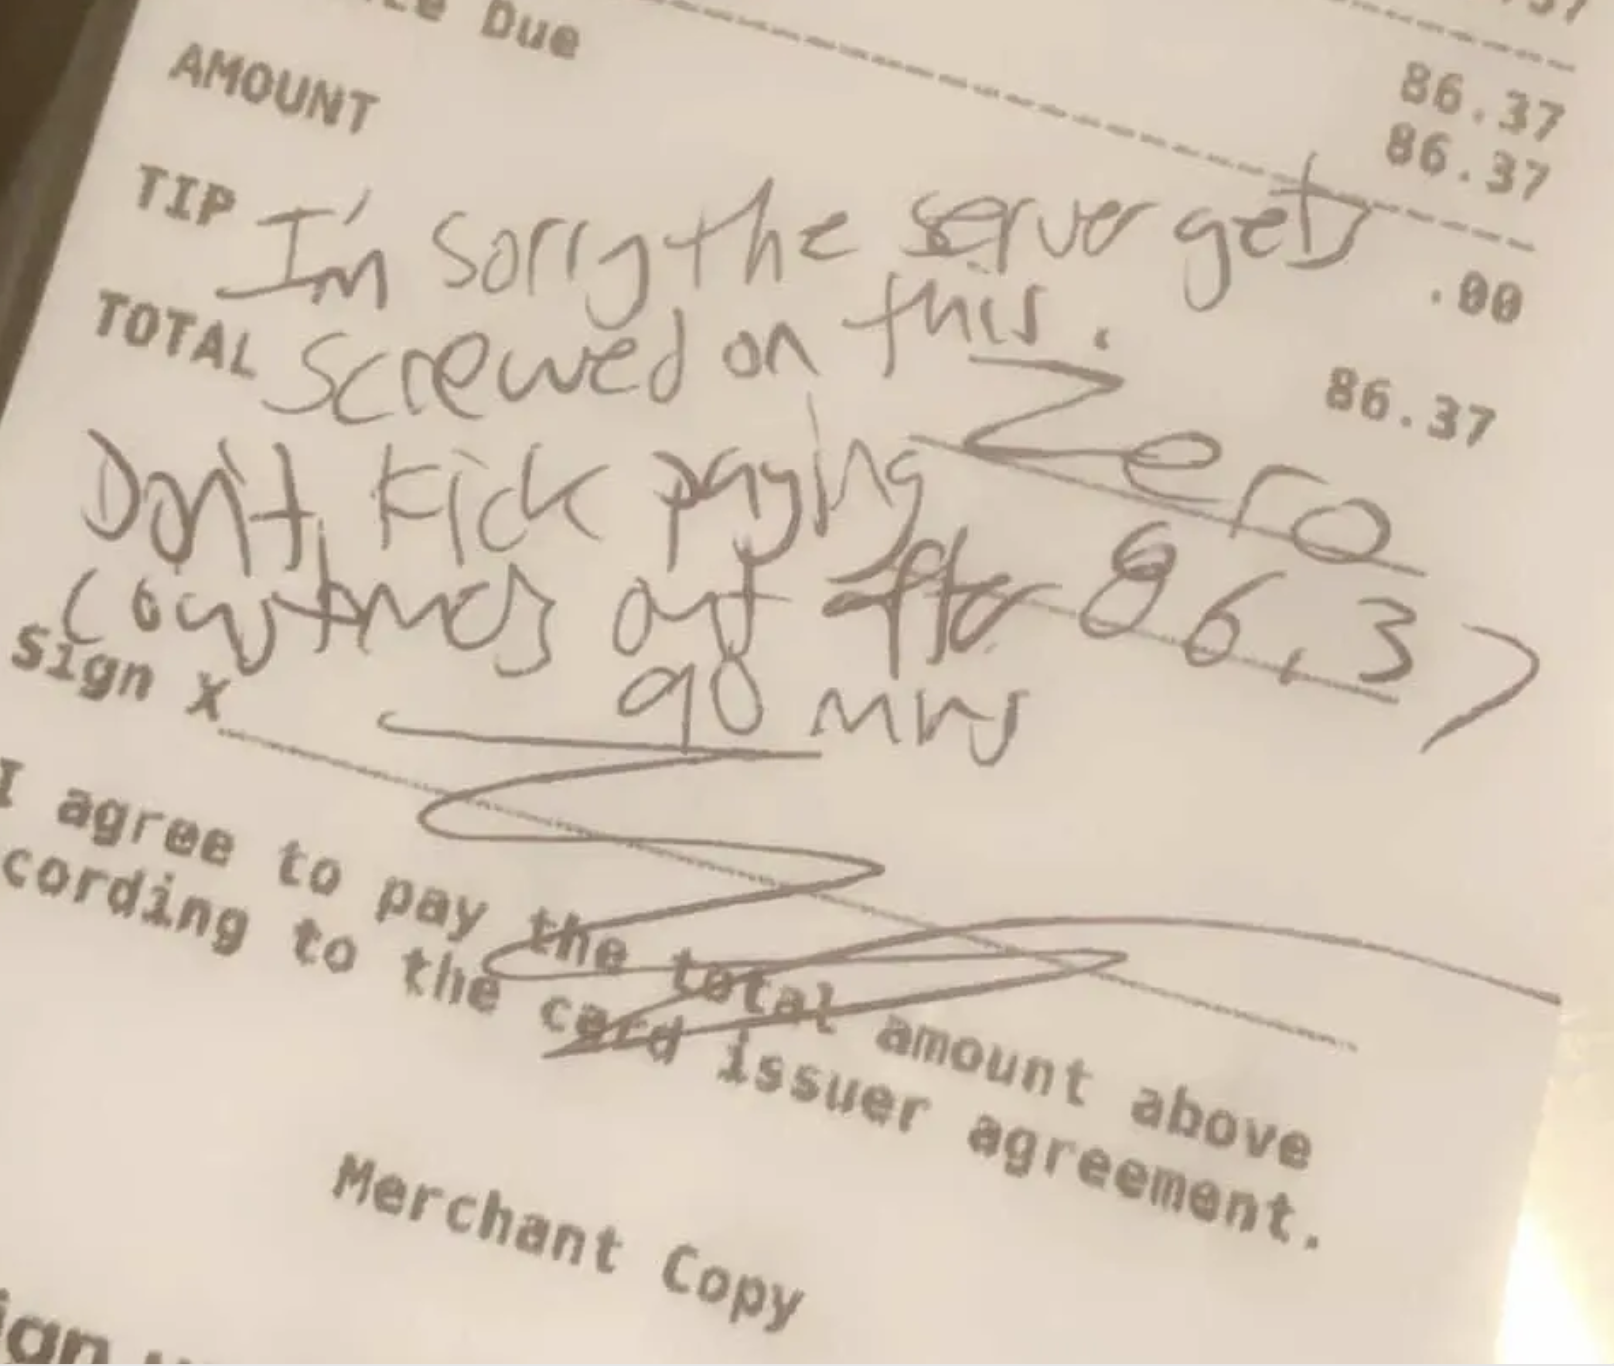 Receipt that reads: &quot;I&#x27;m sorry the server gets screwed on this. Don&#x27;t kick paying customers out after 90 mins&quot;